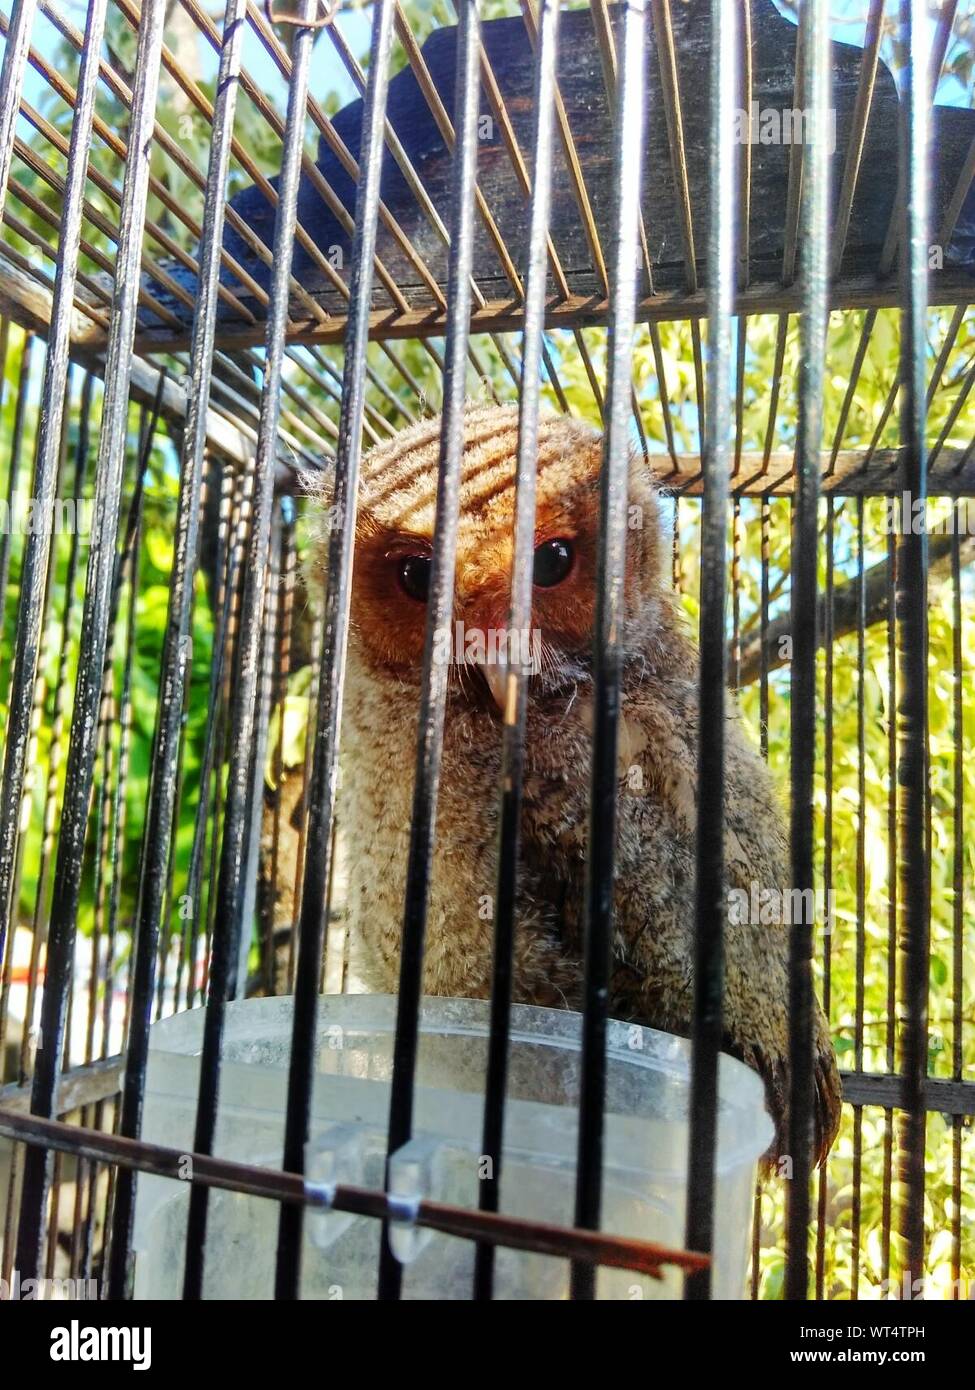 Owl In Cage Stock Photo - Alamy